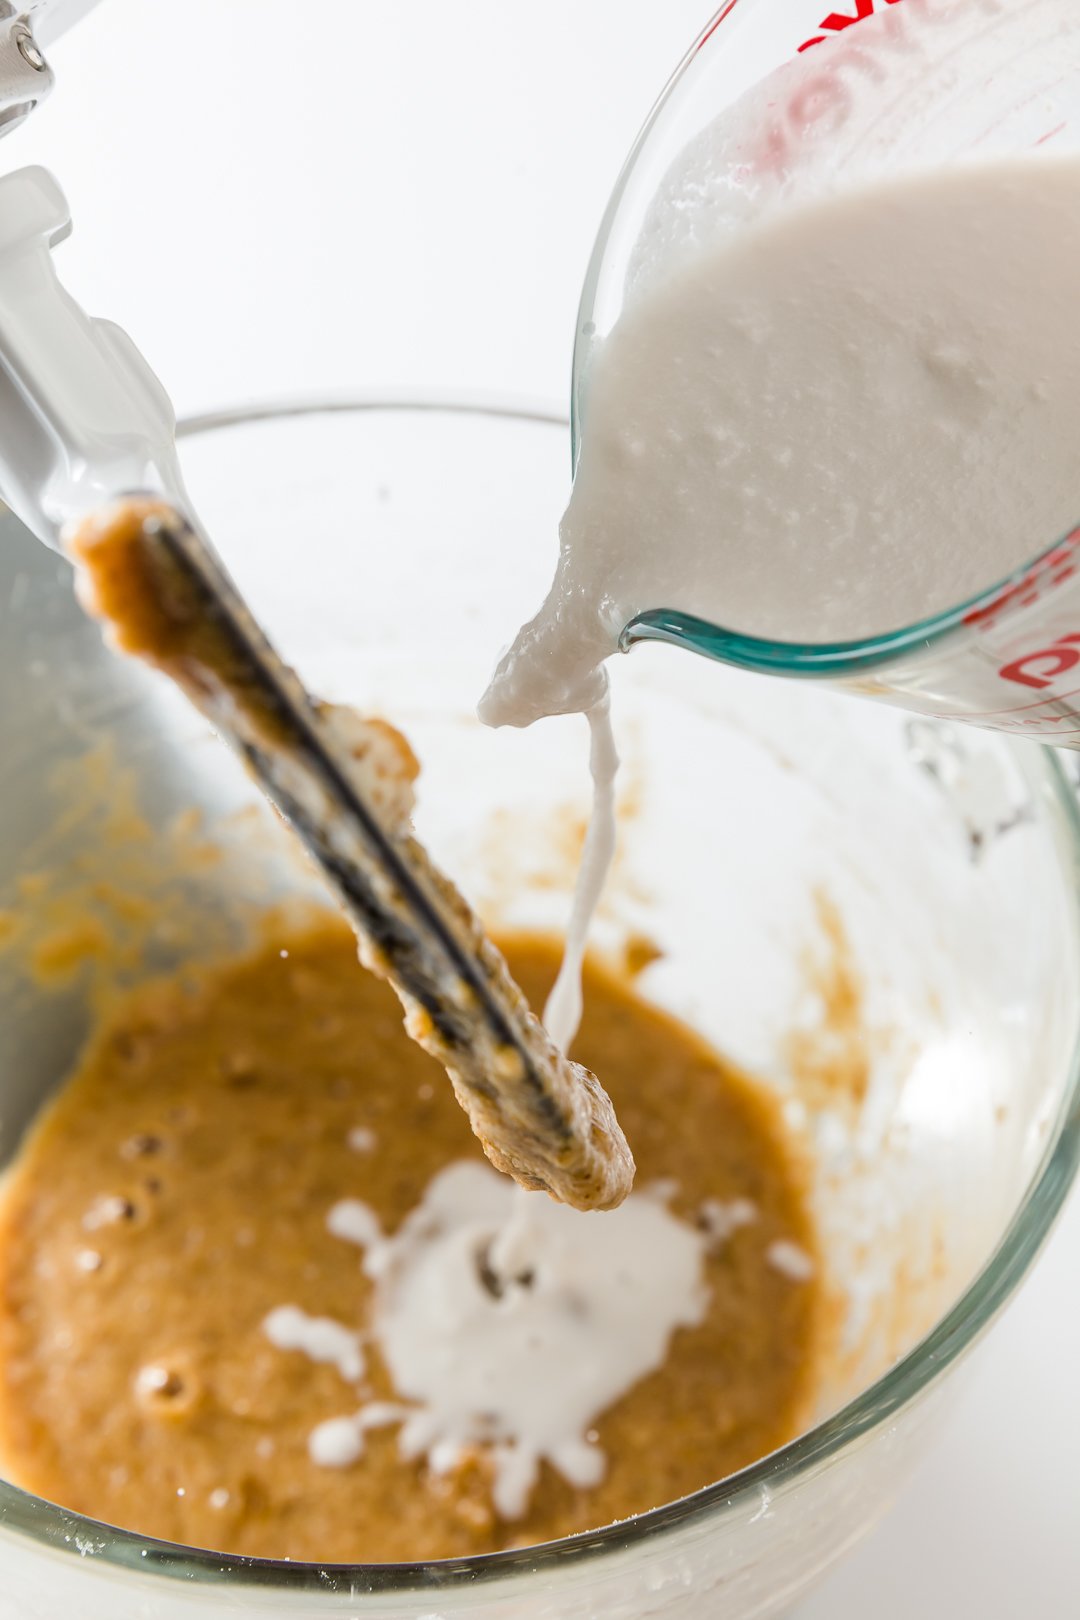 Adding coconut milk to the batter